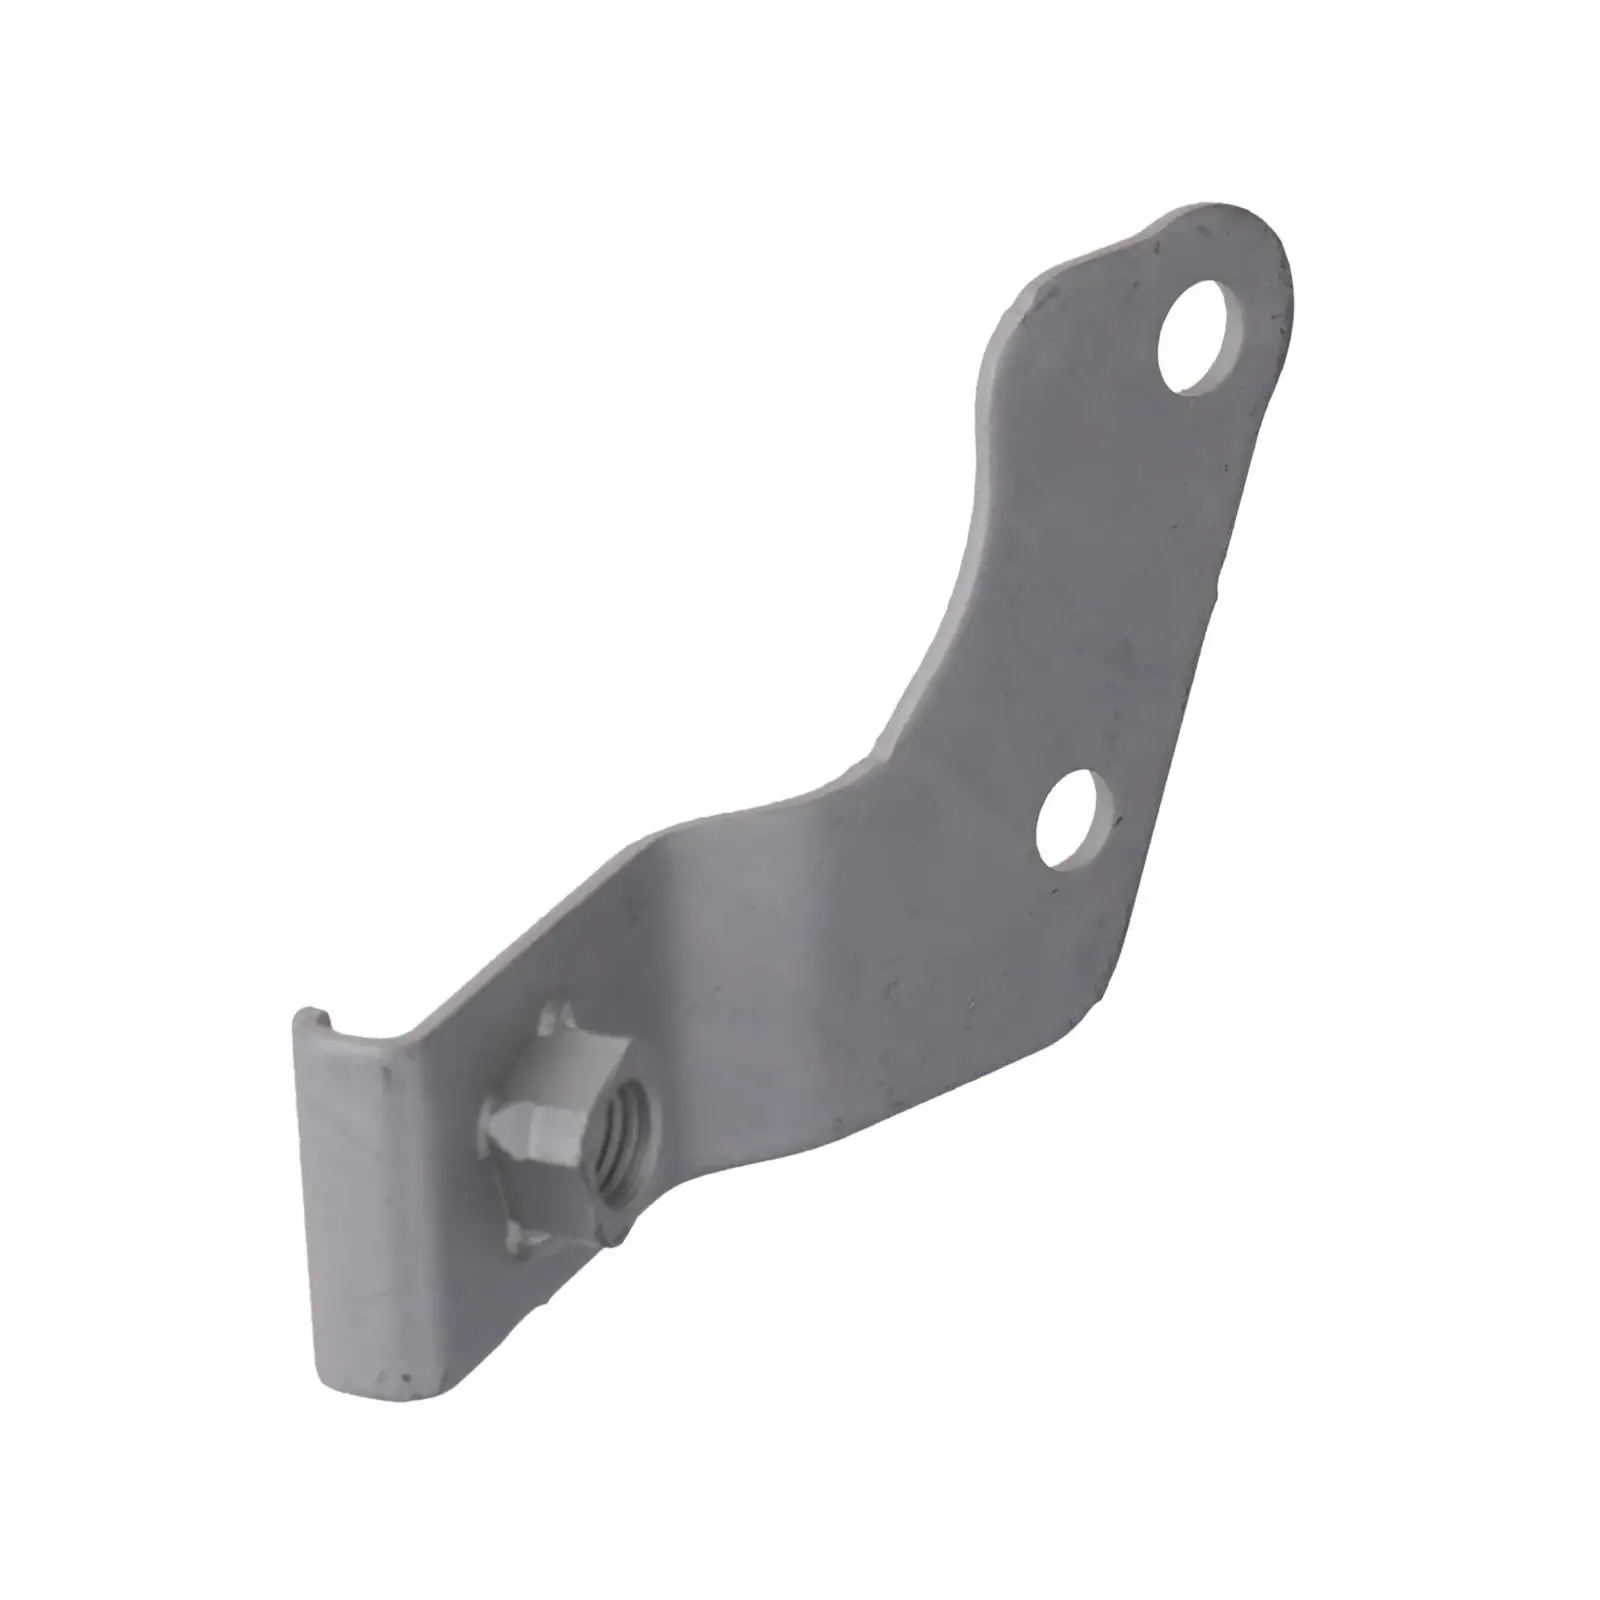 Exhaust Pipe Hanger Bracket, 44521AA090 for Subaru 2.5L Cvt Replaces